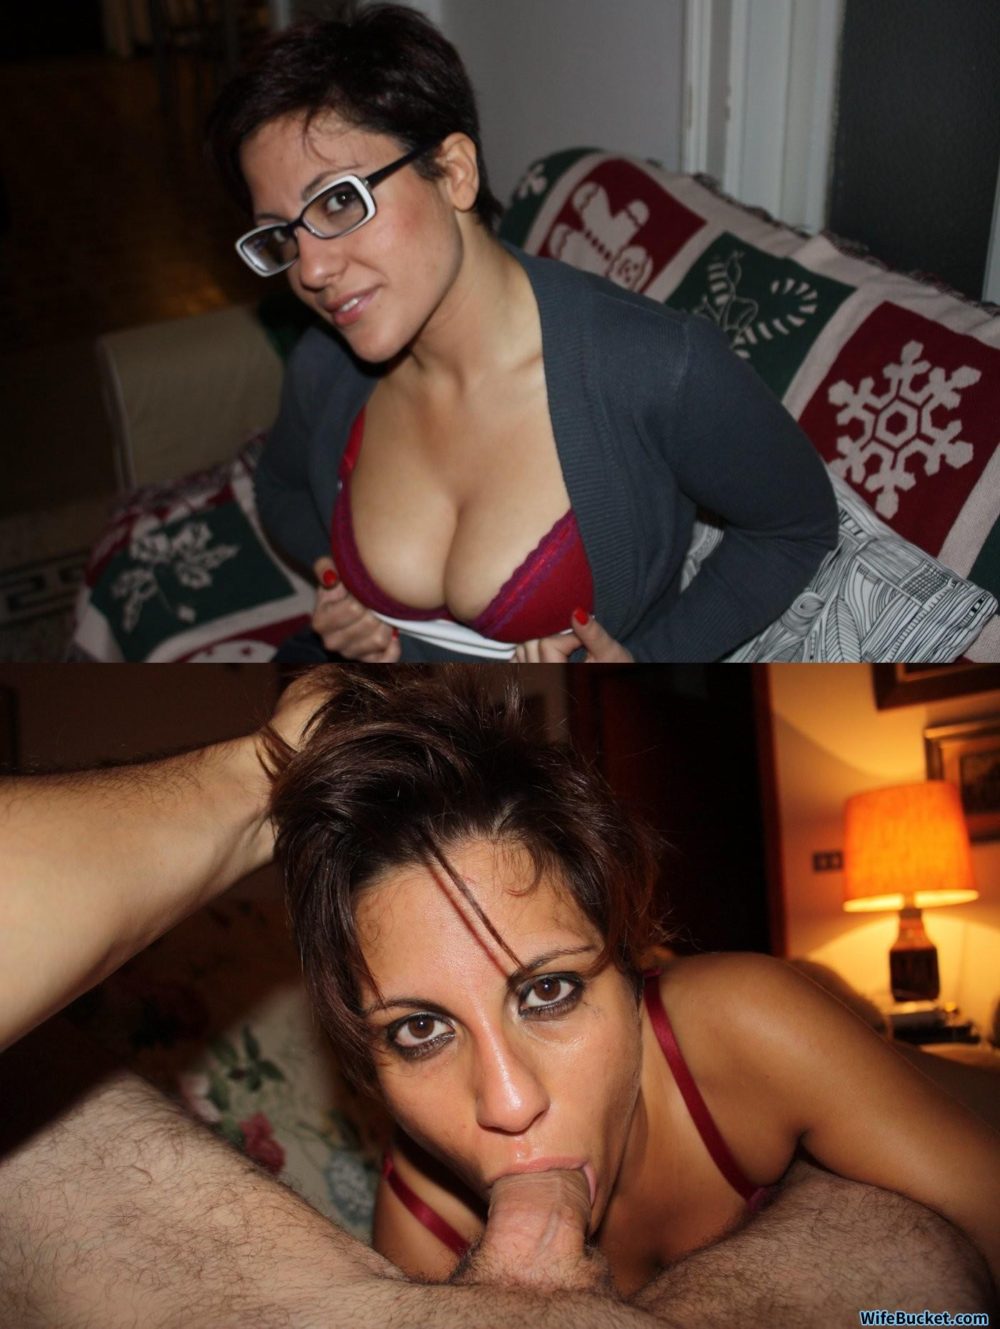 Before and then after the blowjob